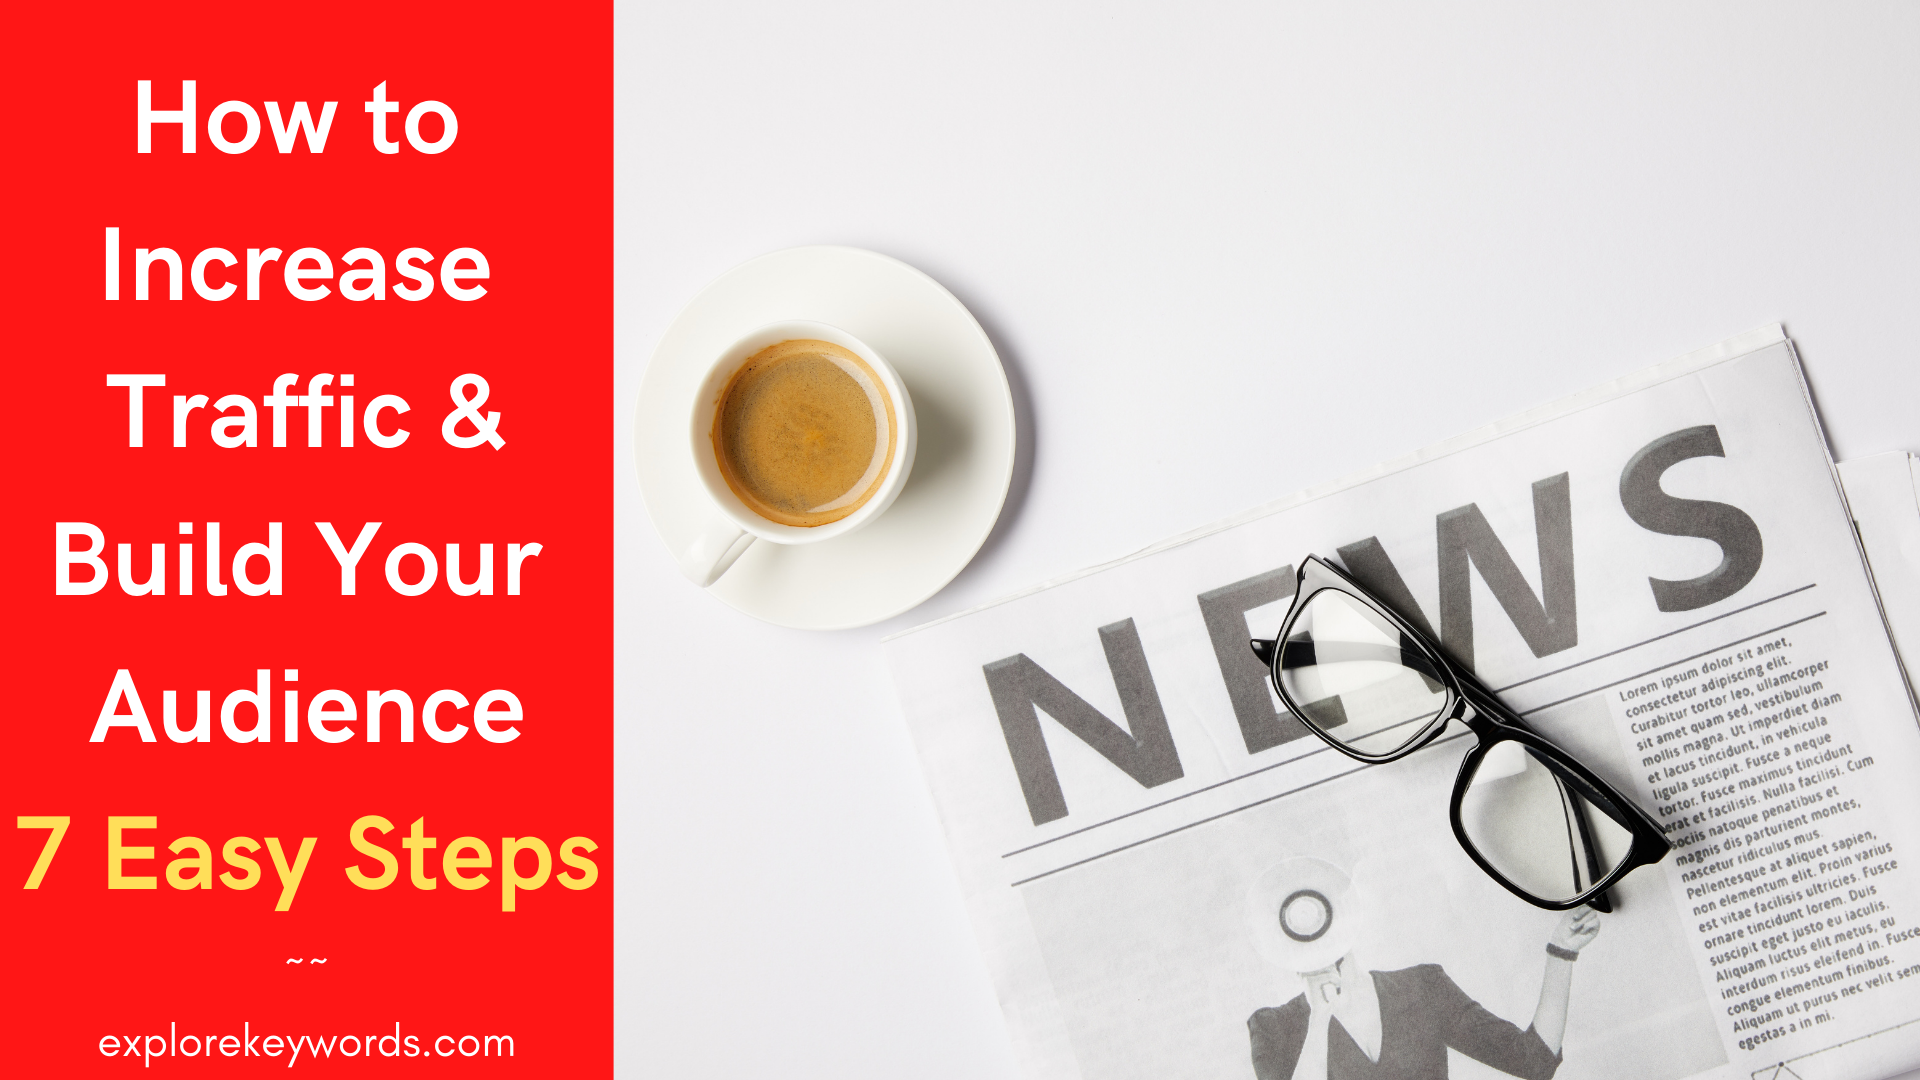 How to Increase Traffic & Build Your Audience 7 Easy Steps